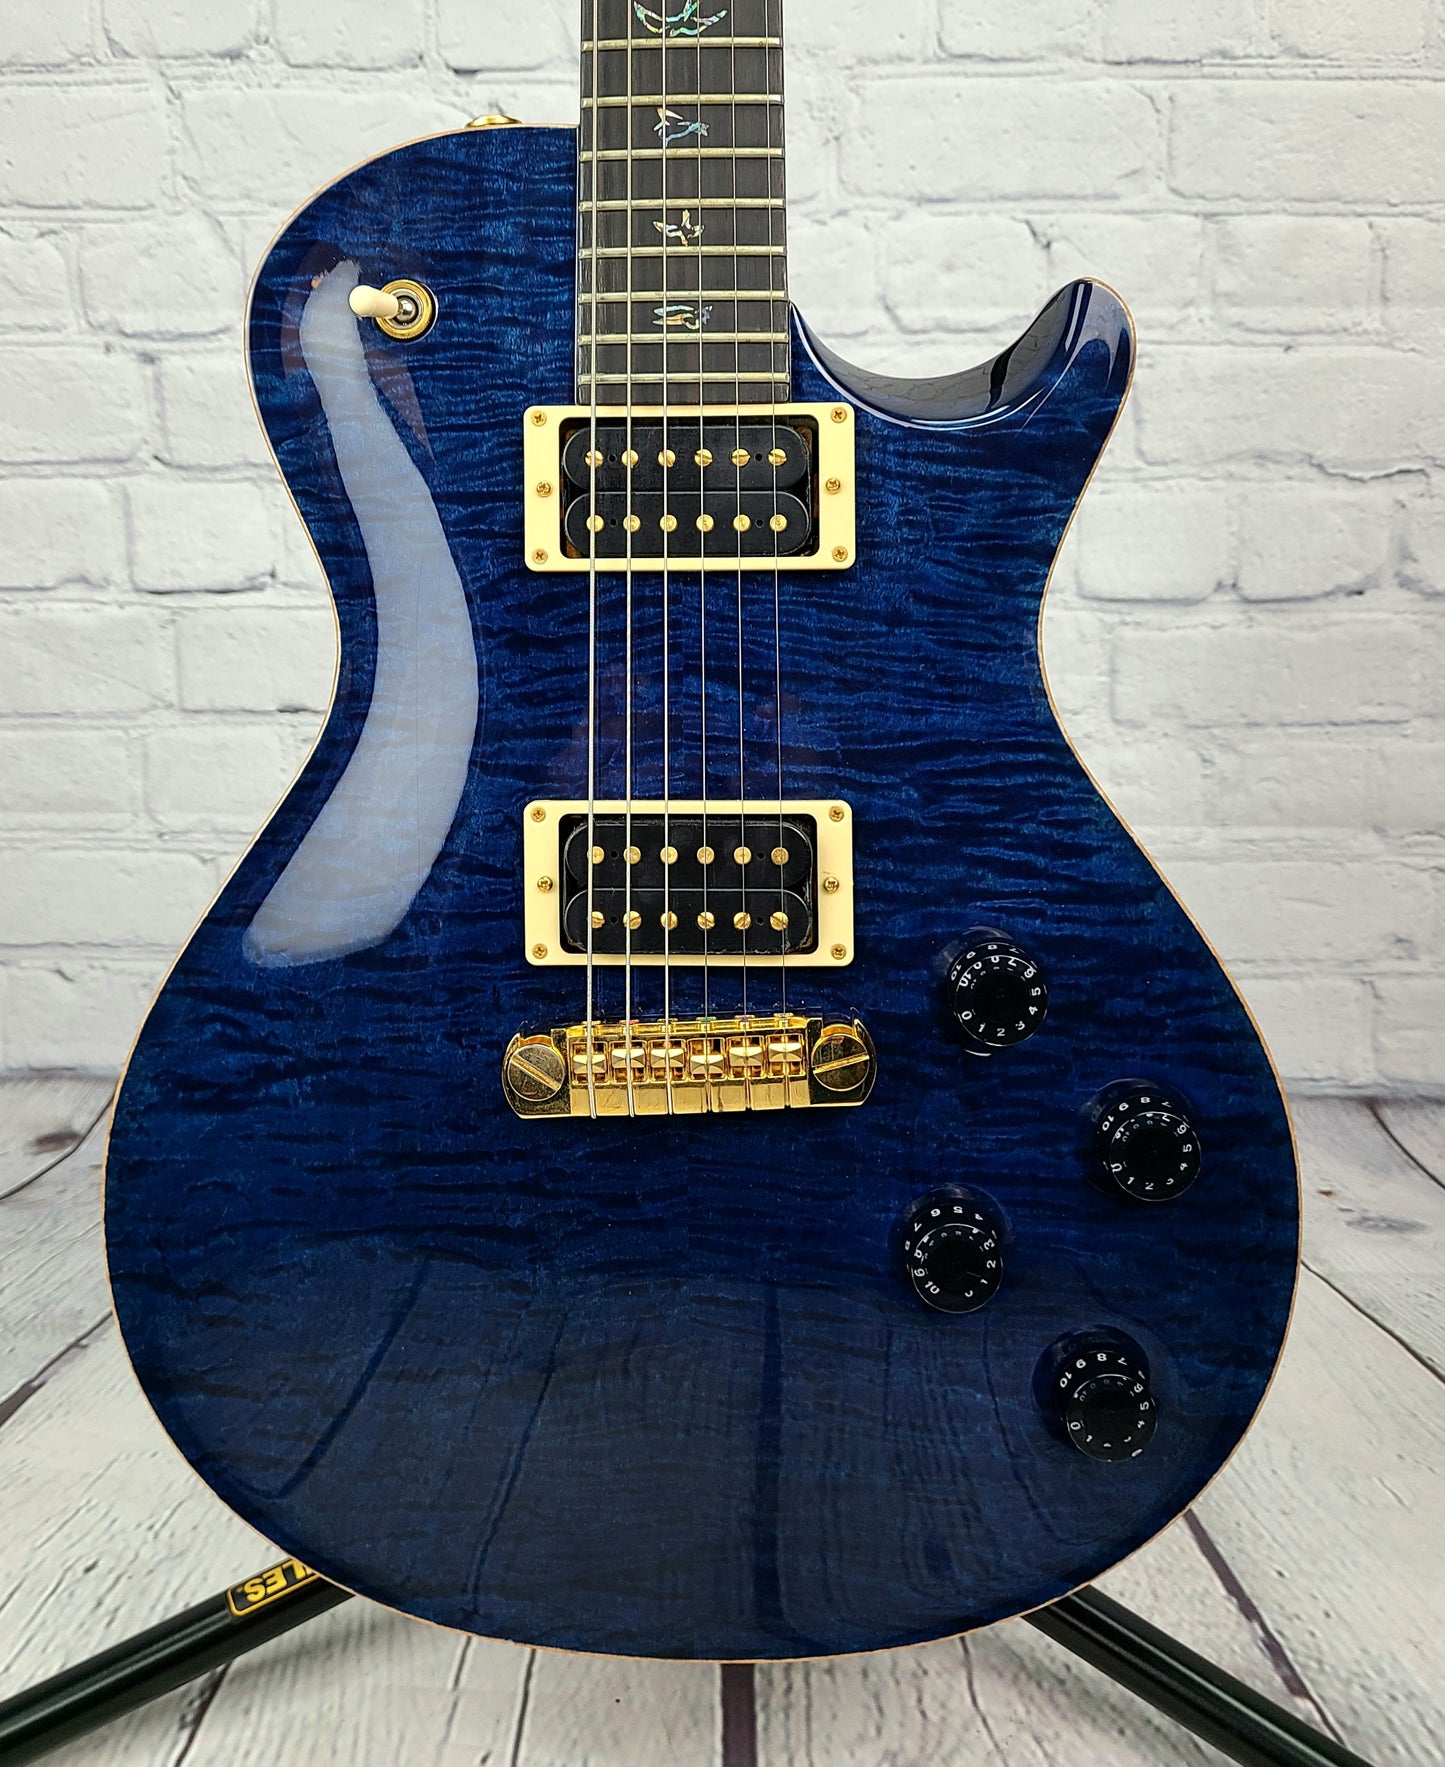 USED 2008 PRS SC250 Singlecut Artist Package Whale Blue Gold Hardware